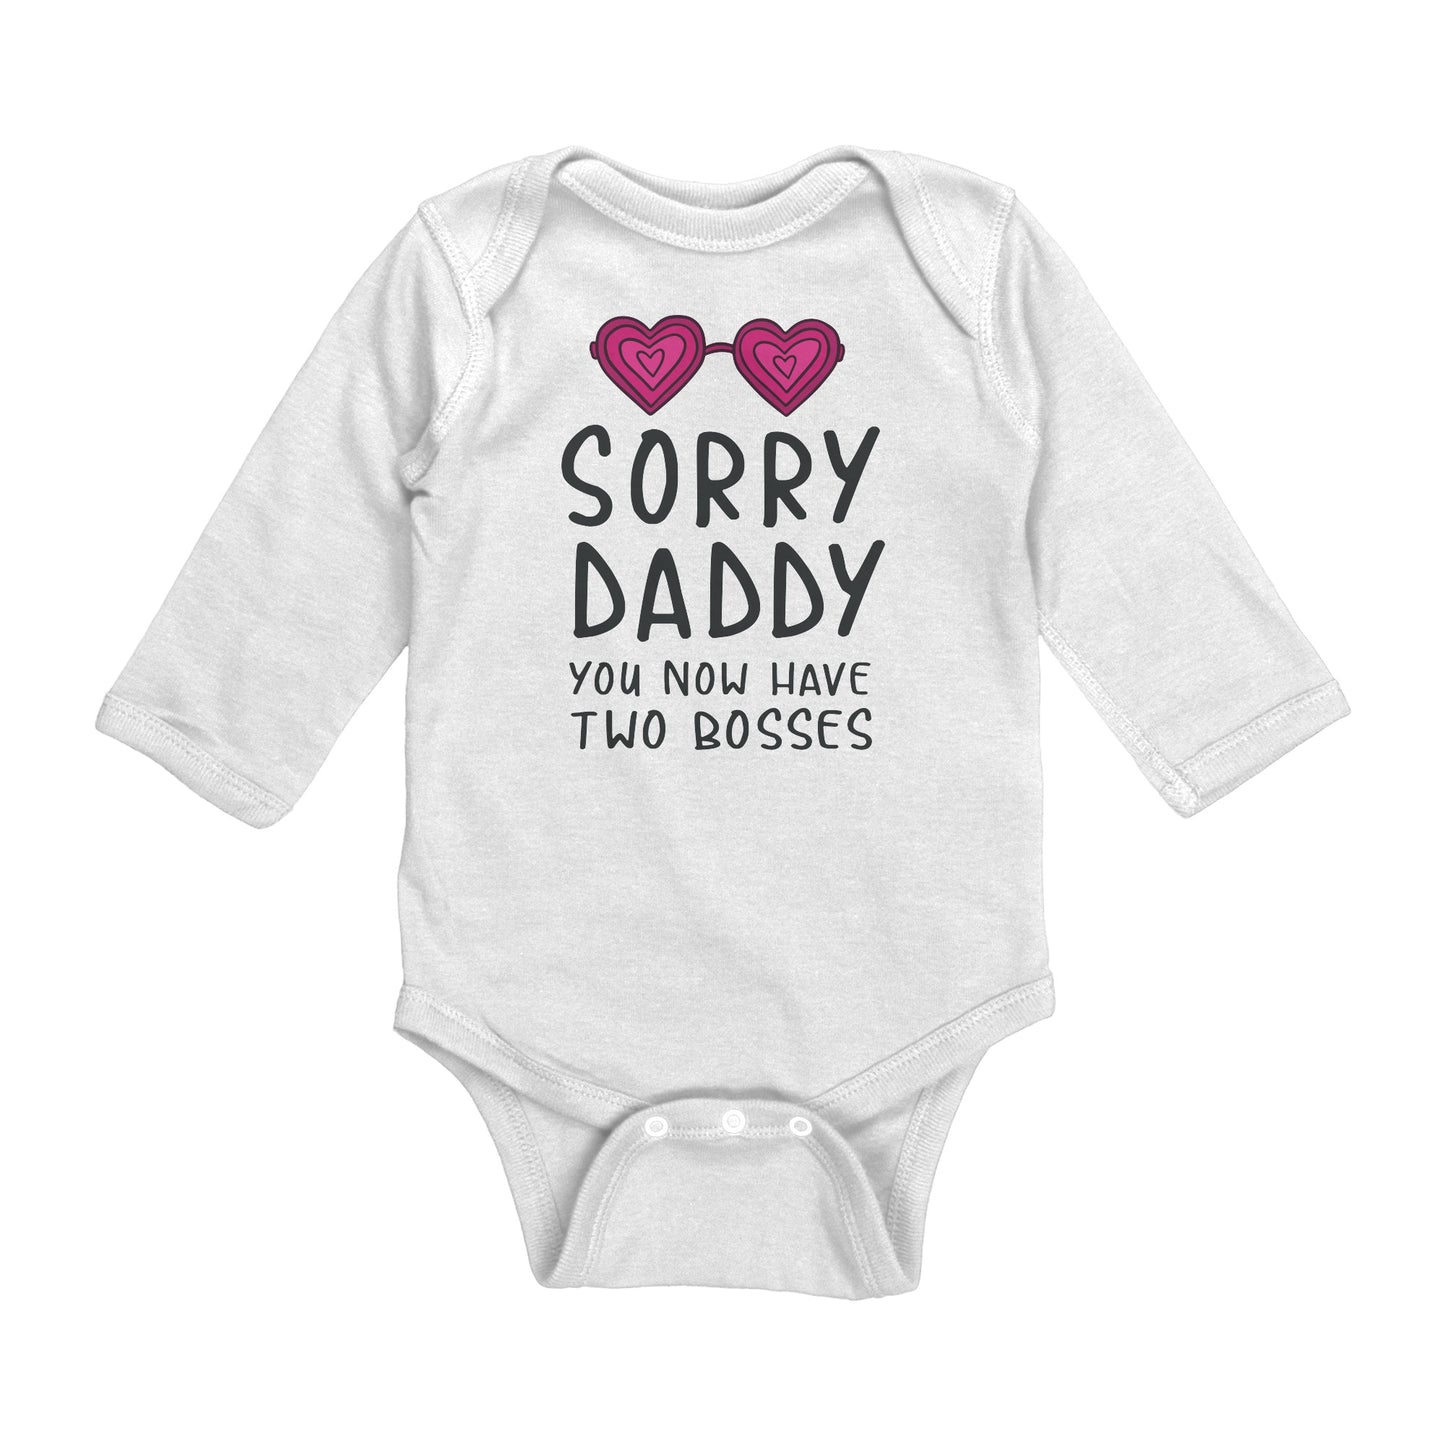 Daddy Have Two Bosses- Infant Bodysuits